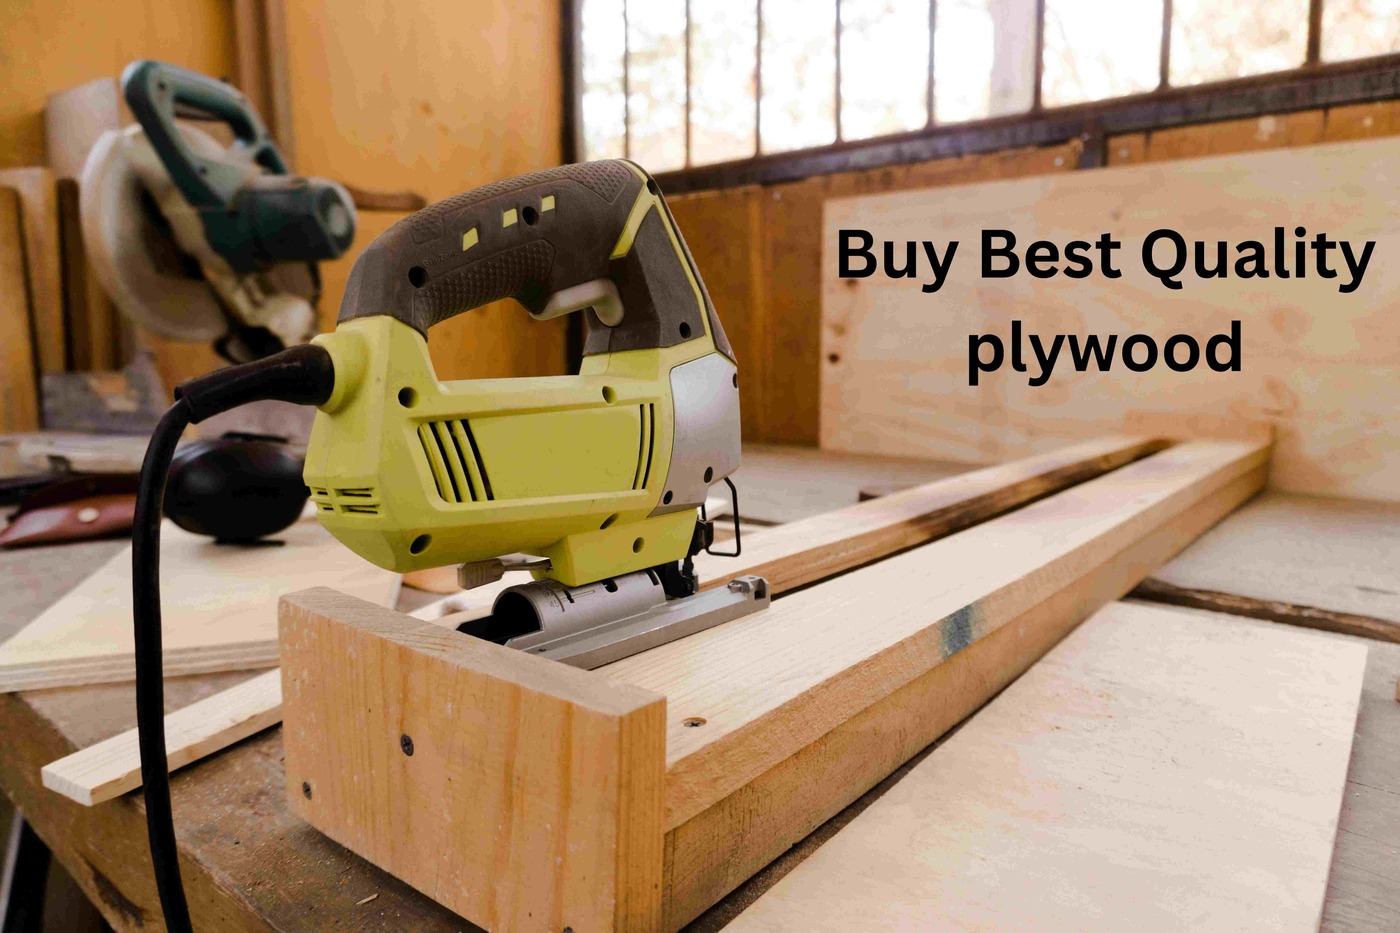 How do we check the quality of plywood And which plywood is good to use for home furniture?